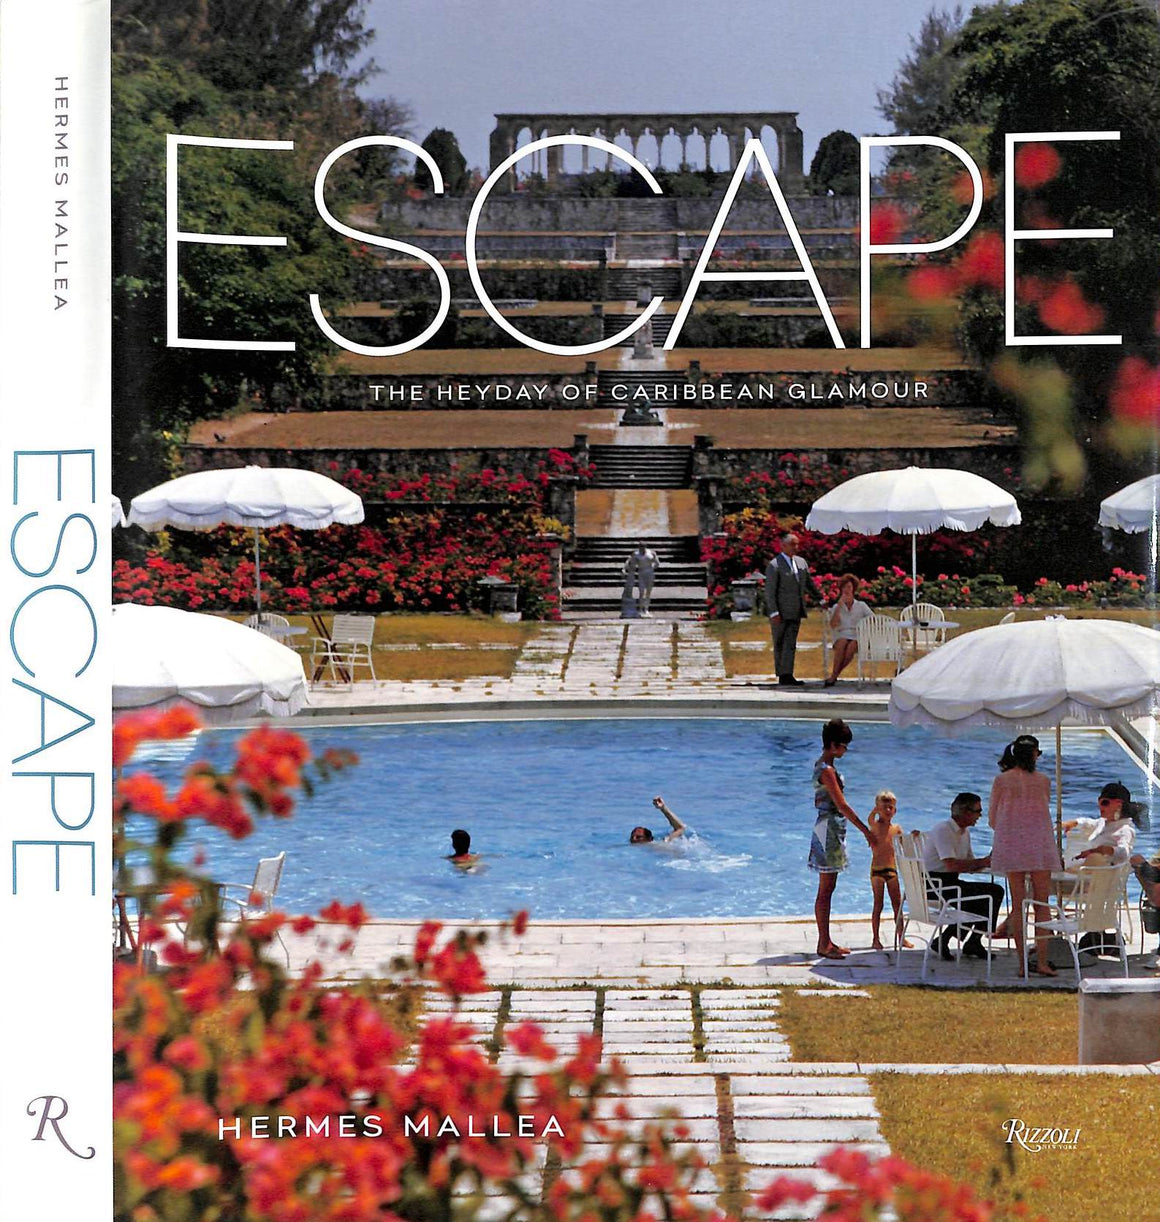 "Escape: The Heyday Of Caribbean Glamour" 2014 MALLEA, Hermes